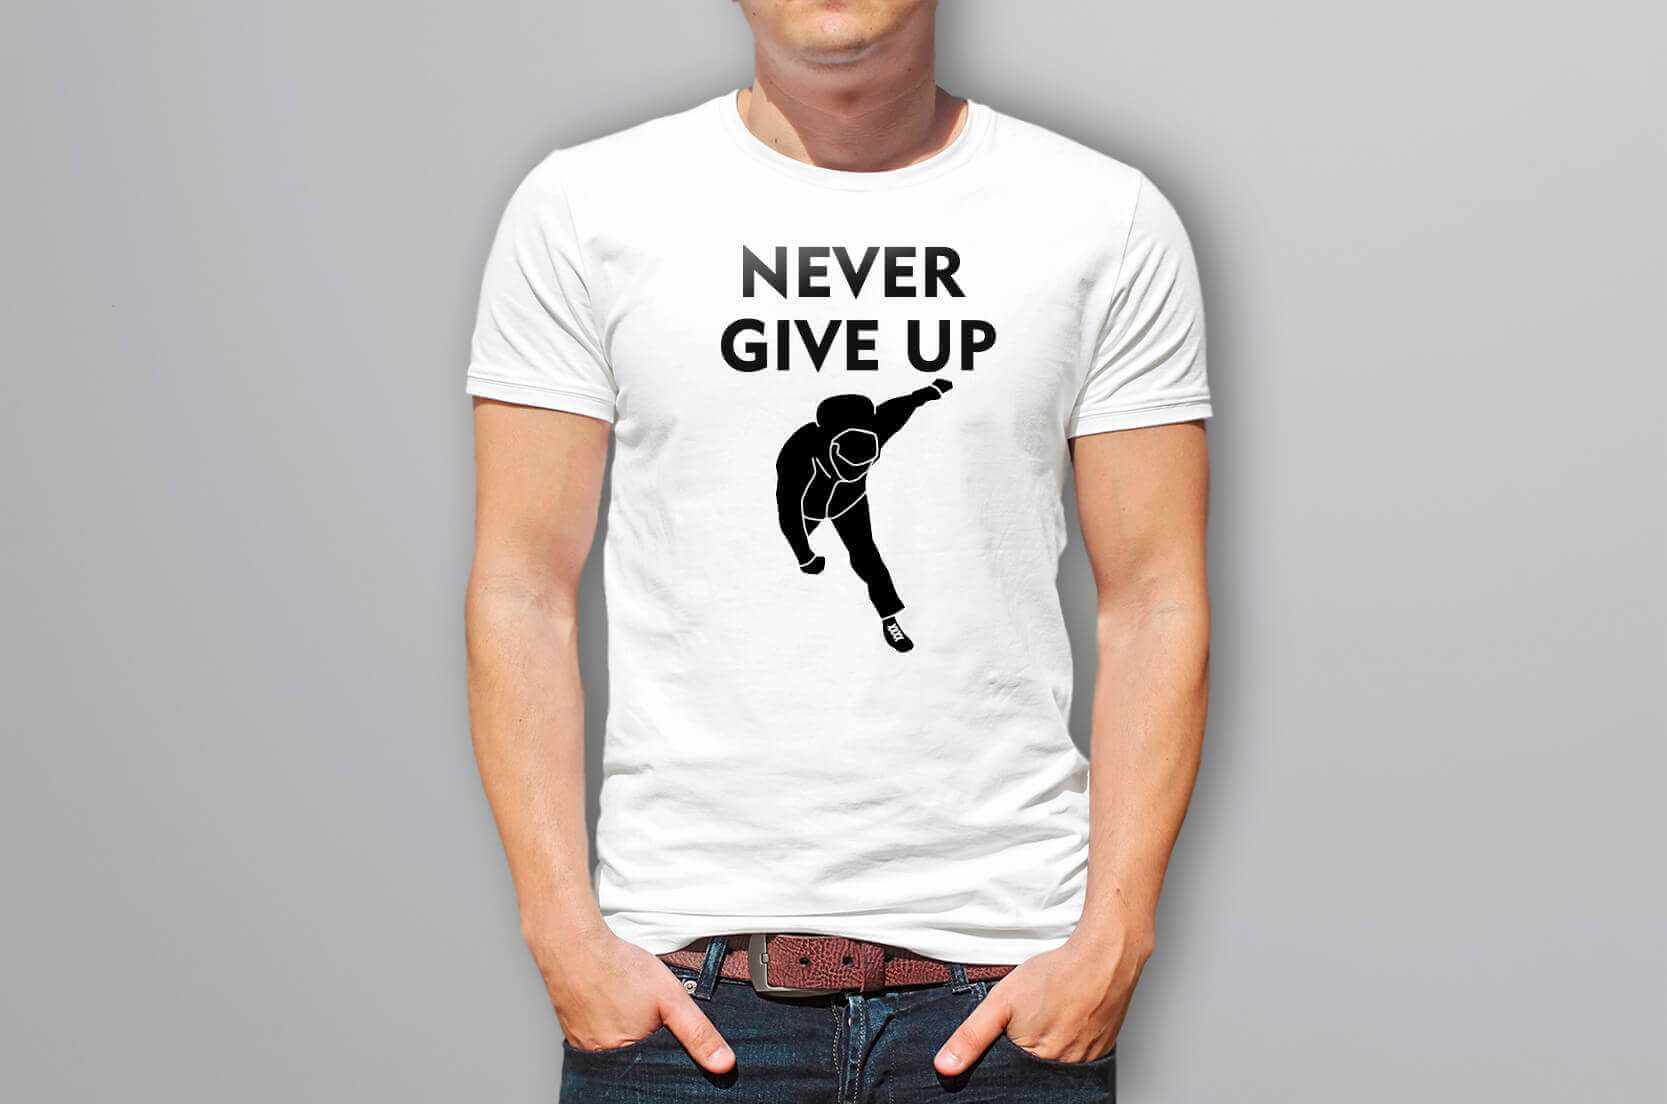 Never give up 永不放棄的圖片